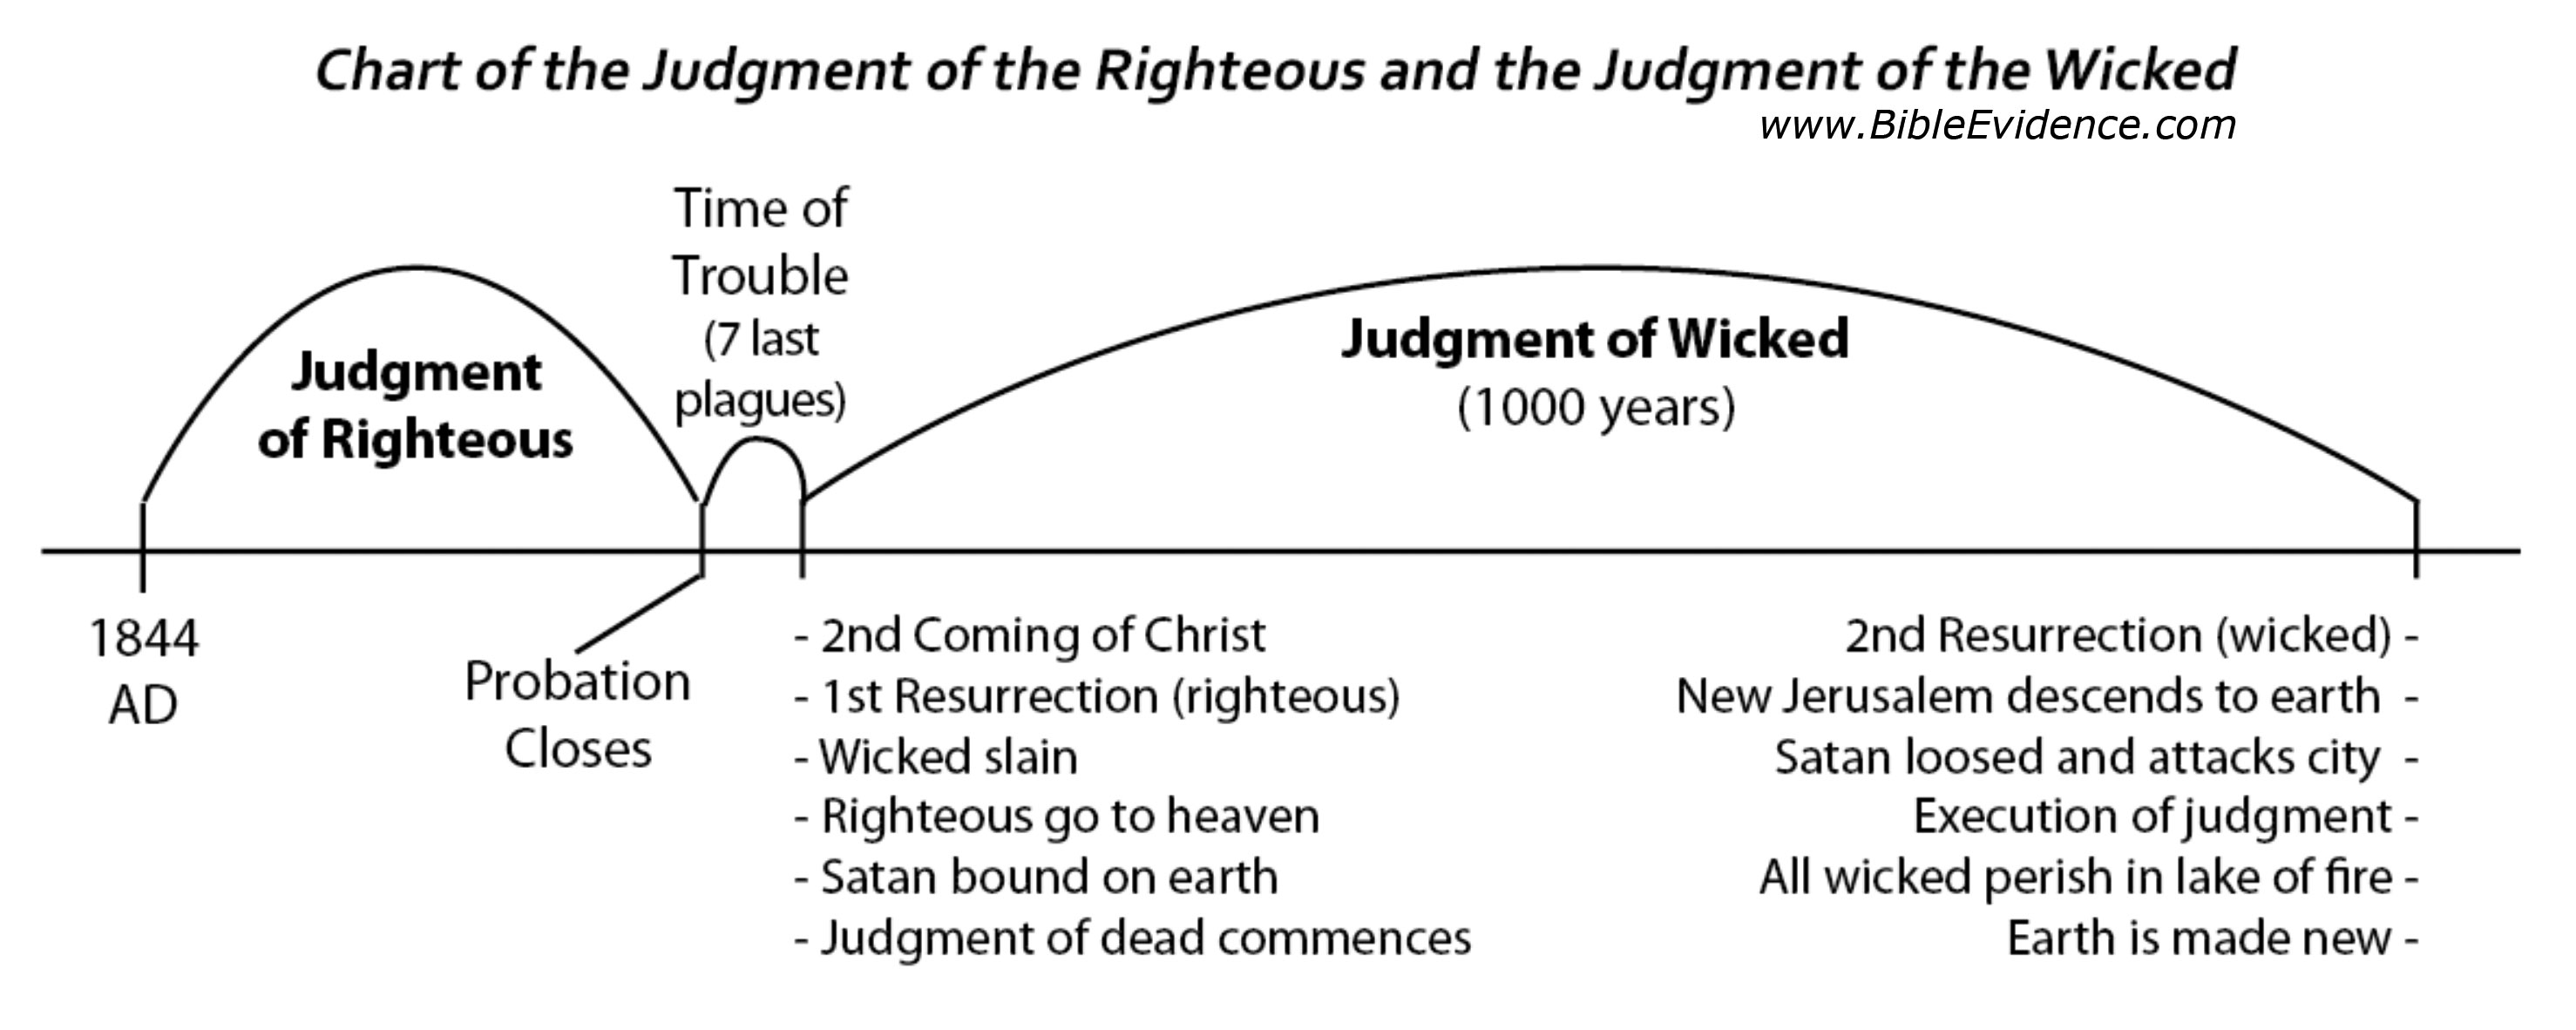 Prophecy timeline of the millenial judgment of the wicked.